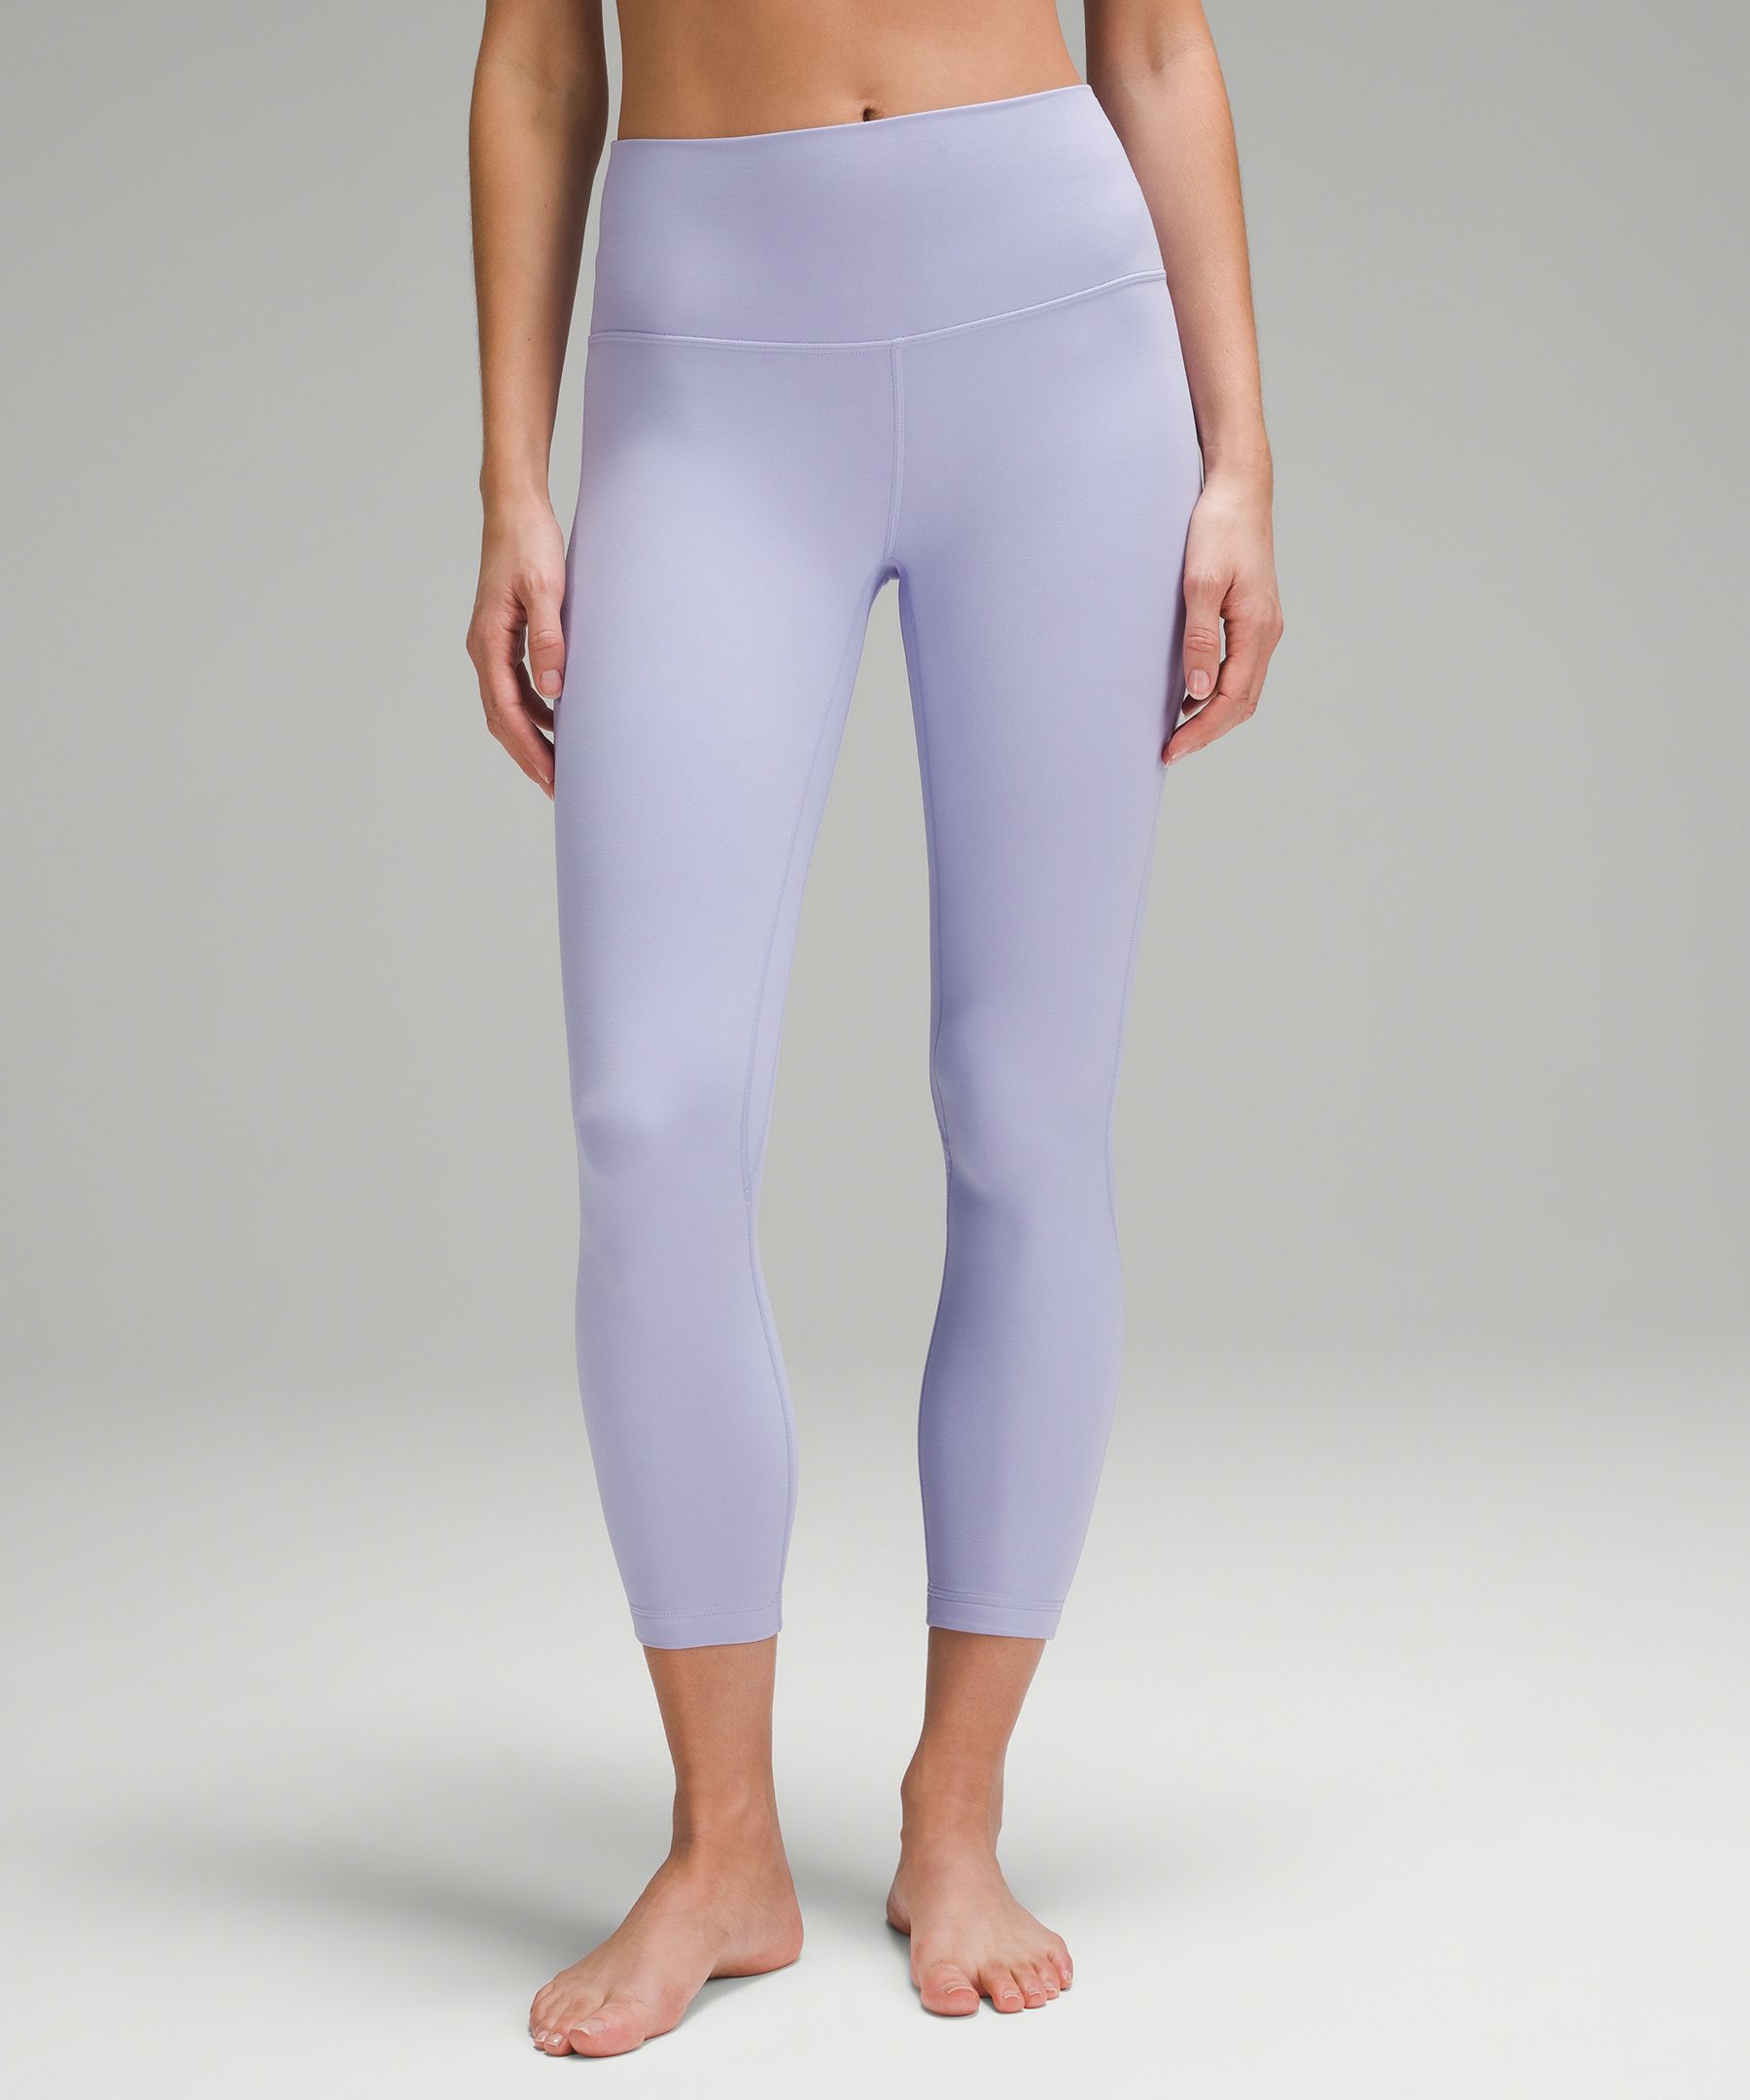 Lululemon Align Pant 25 Nocturnal Teal Size 6 Blue - $70 - From Ava